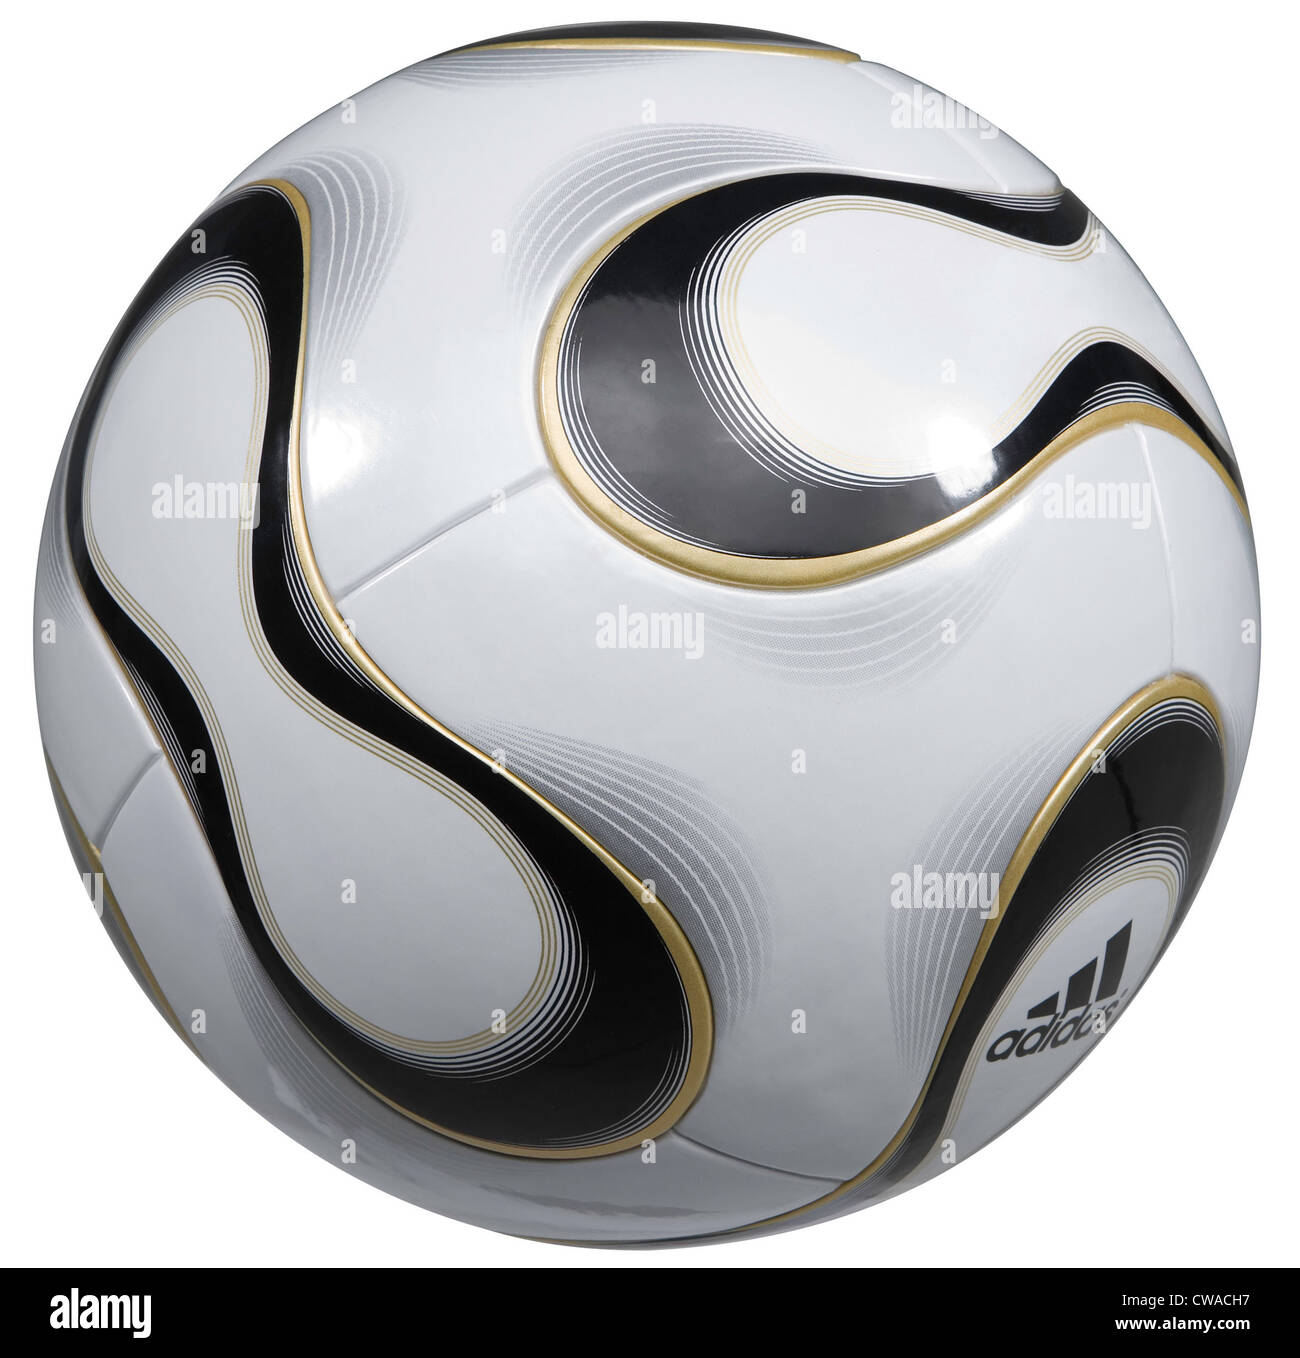 Berlin, the official football of the Football World Cup 2006 Stock Photo